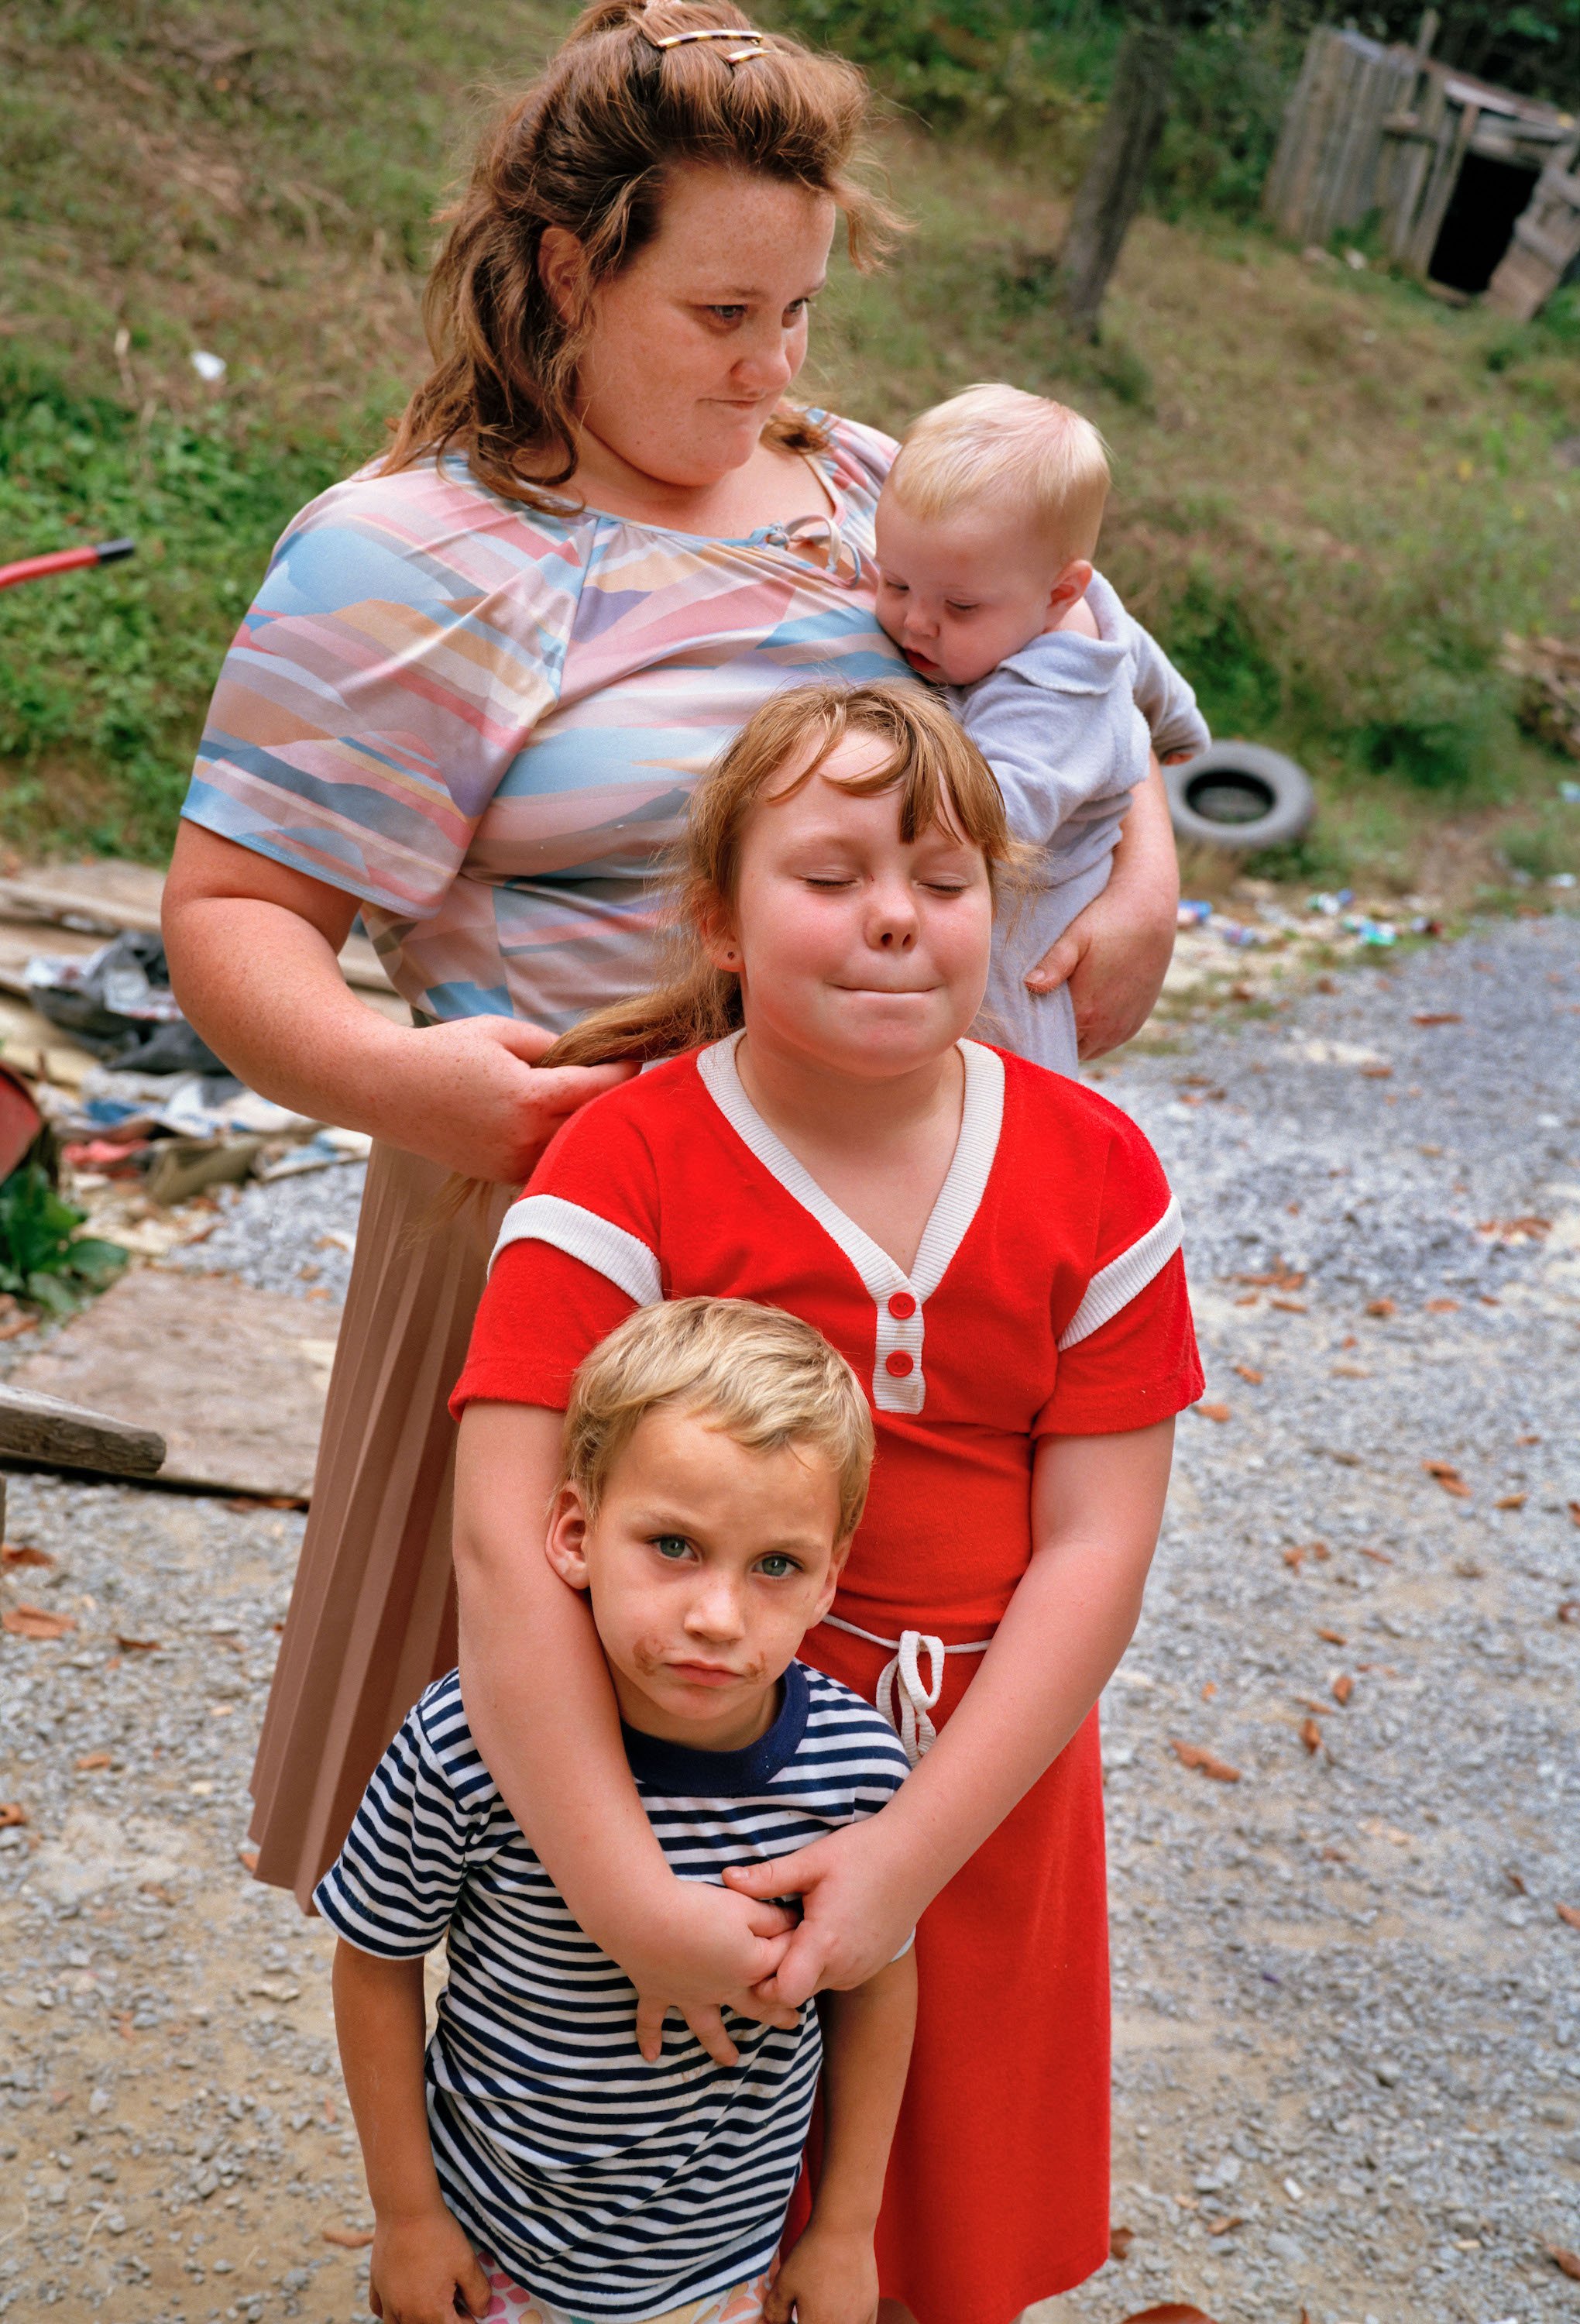  Sheron Rupp  Mother with Children, Harlan County, Kentucky  Image: 1990/printed: 2021 Edition: 1/10 Inkjet print 36 x 24 1/2 in. (image size)  The Do Good Fund, Inc., 2021-018 